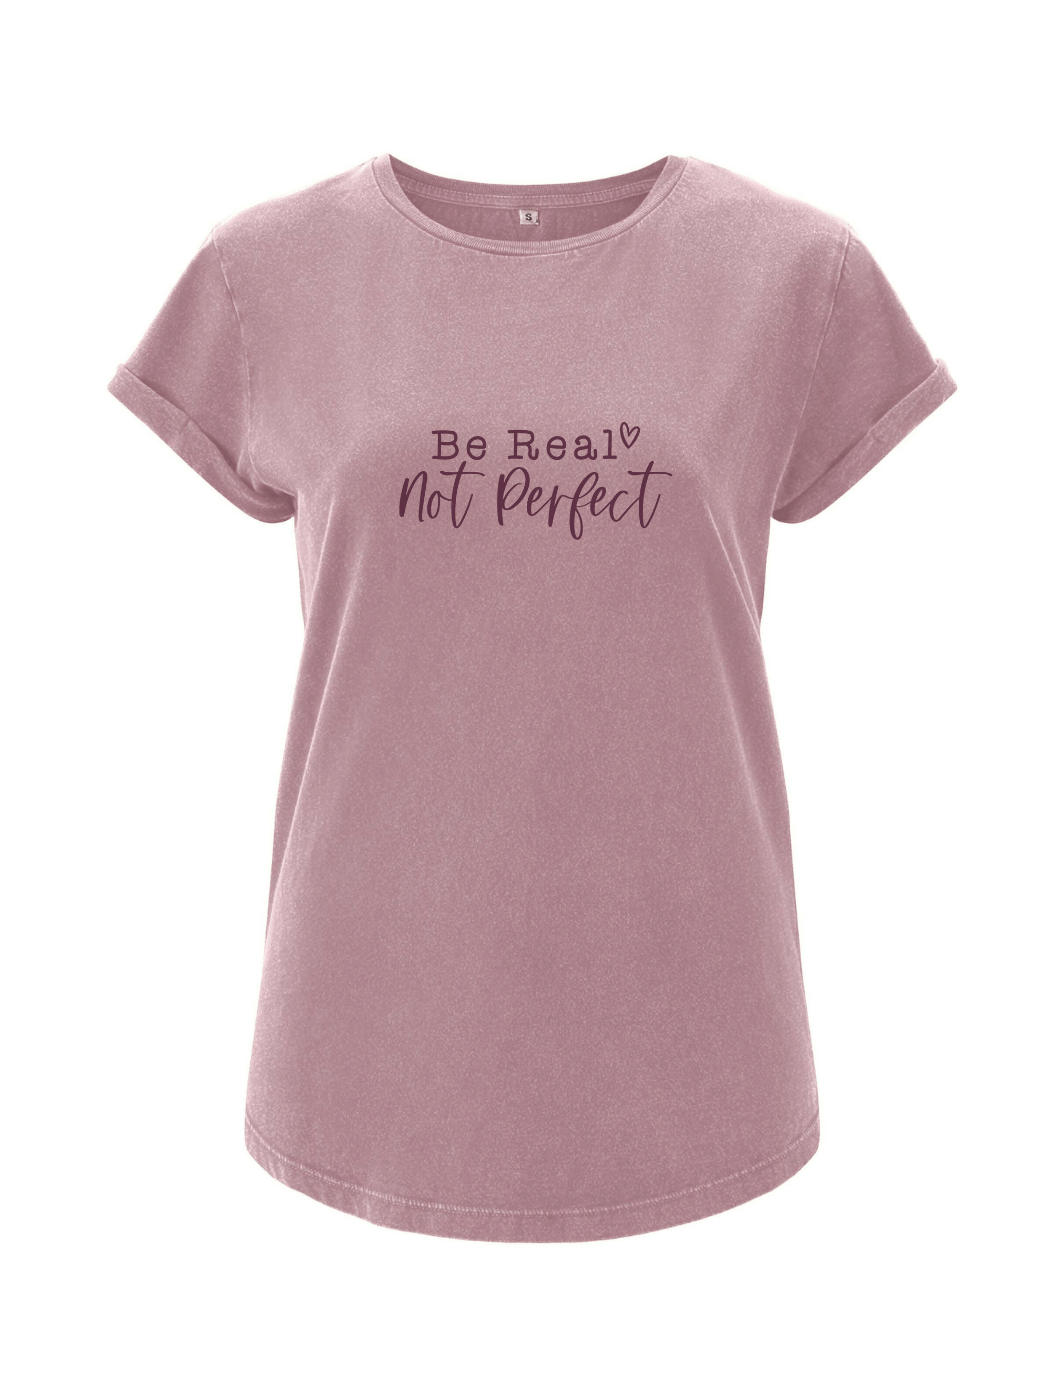 Be real-not perfekt Damen T-Shirt rolled arms purple rose